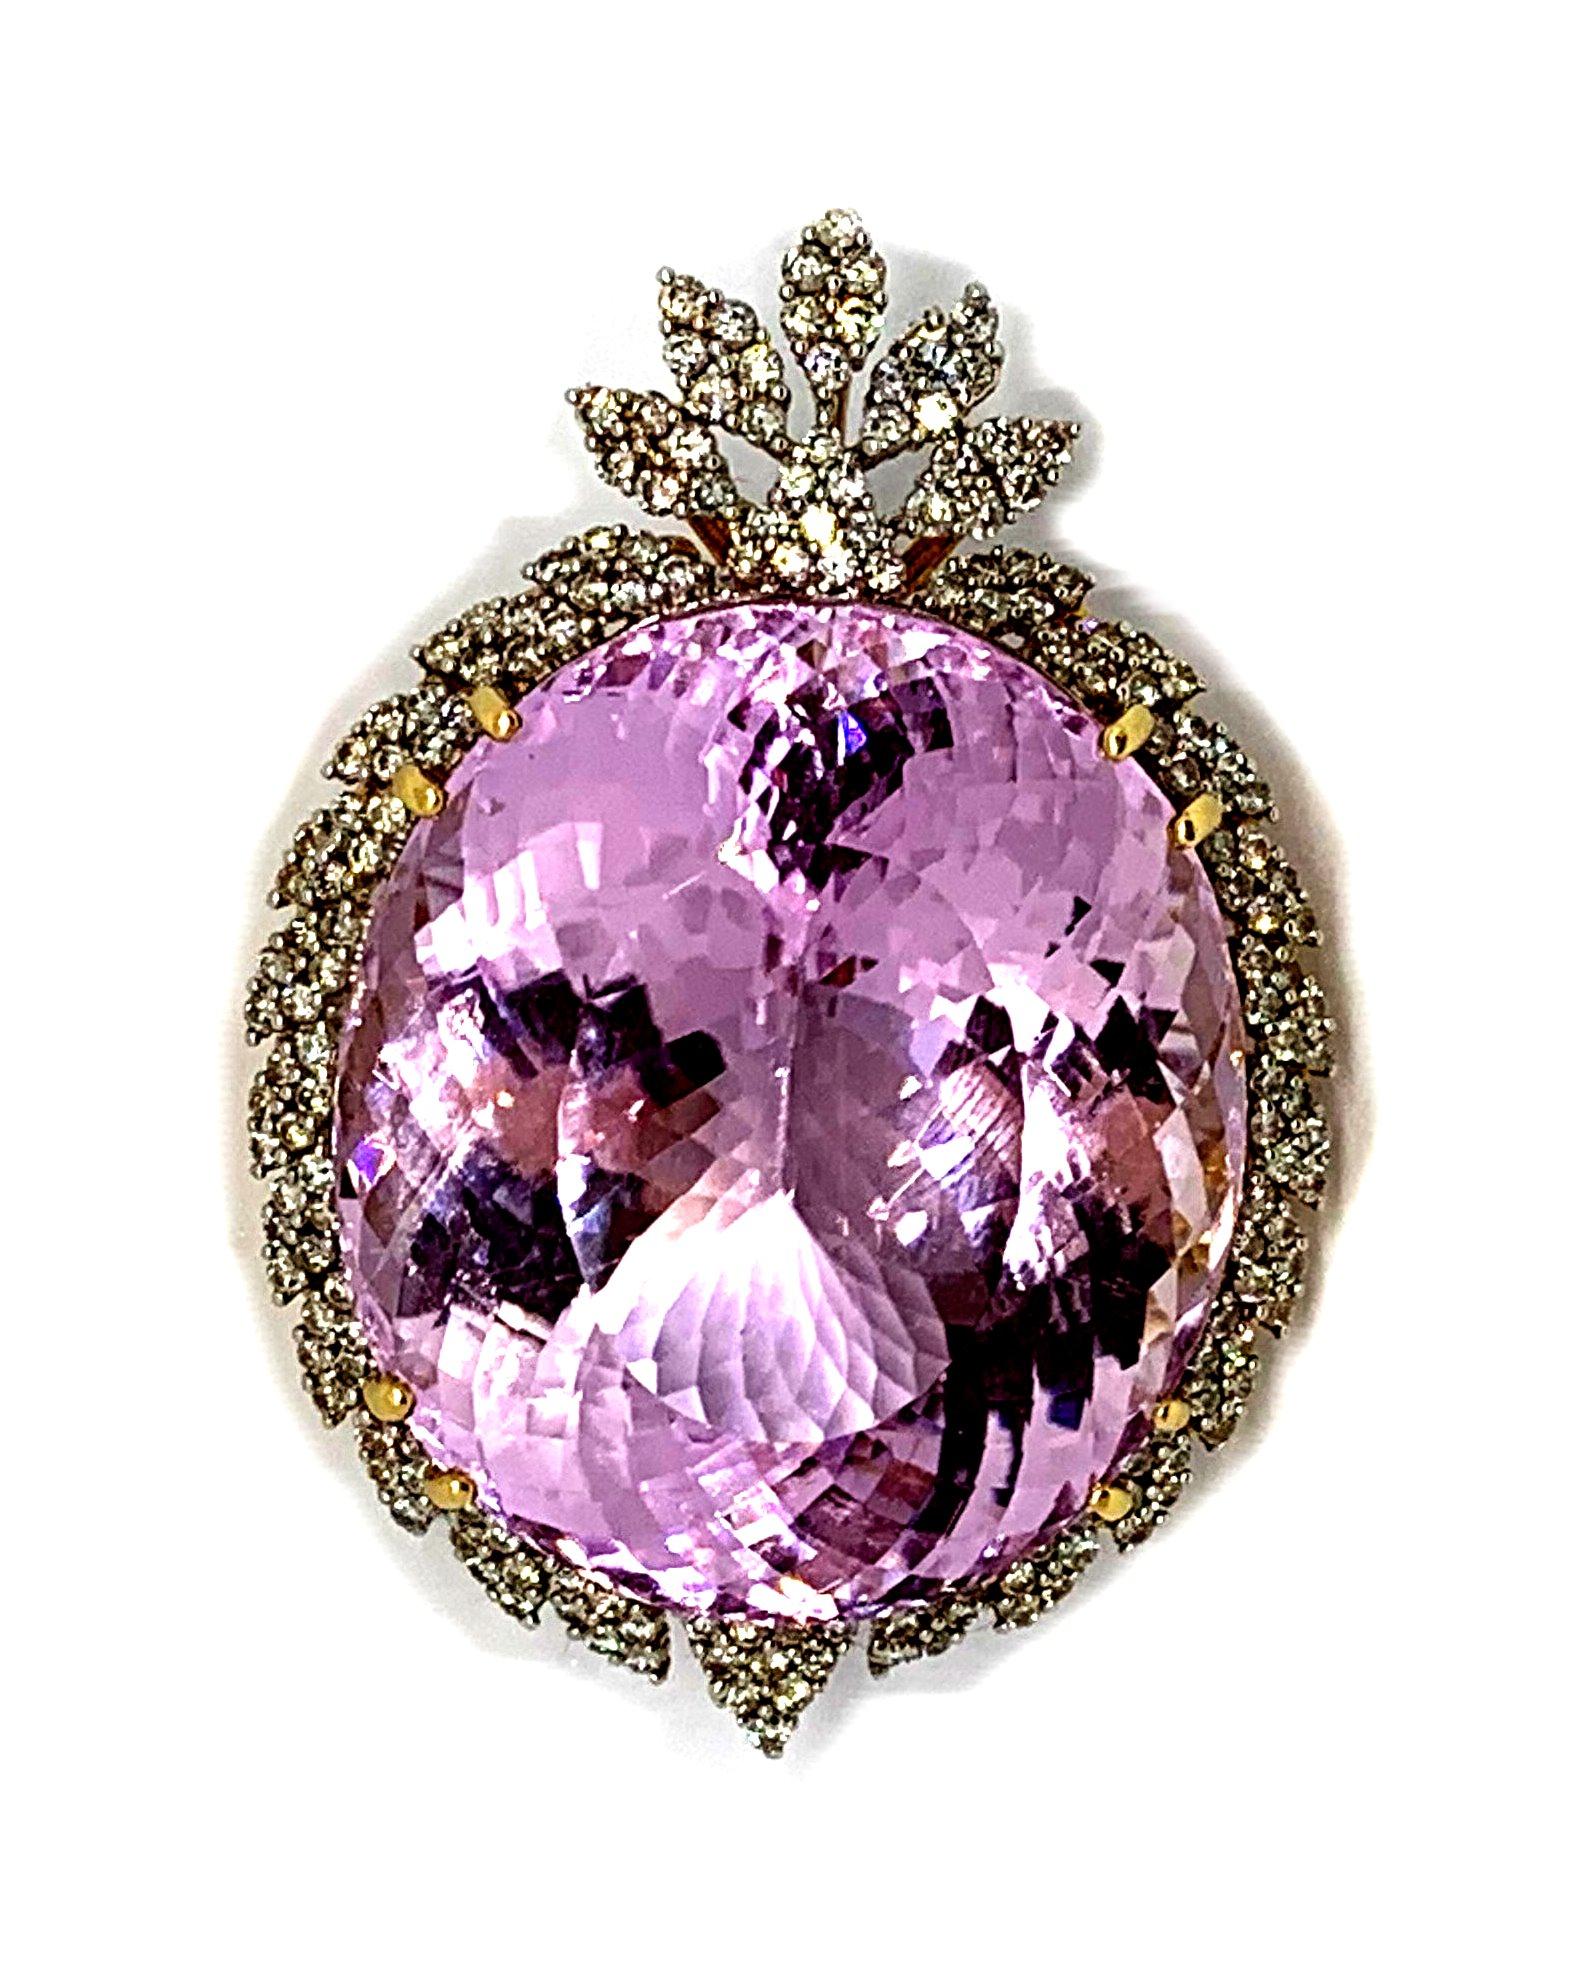 A statement re carpet piece.
PENDANT, an oval faceted pink kunzite/spodumene, secured in a claw setting within a
surround of diamond set leaves and surmounted by a spray of diamond set leaves.
The kunzite measures 33mm x 28.7mm, depth 17.62mm (ca